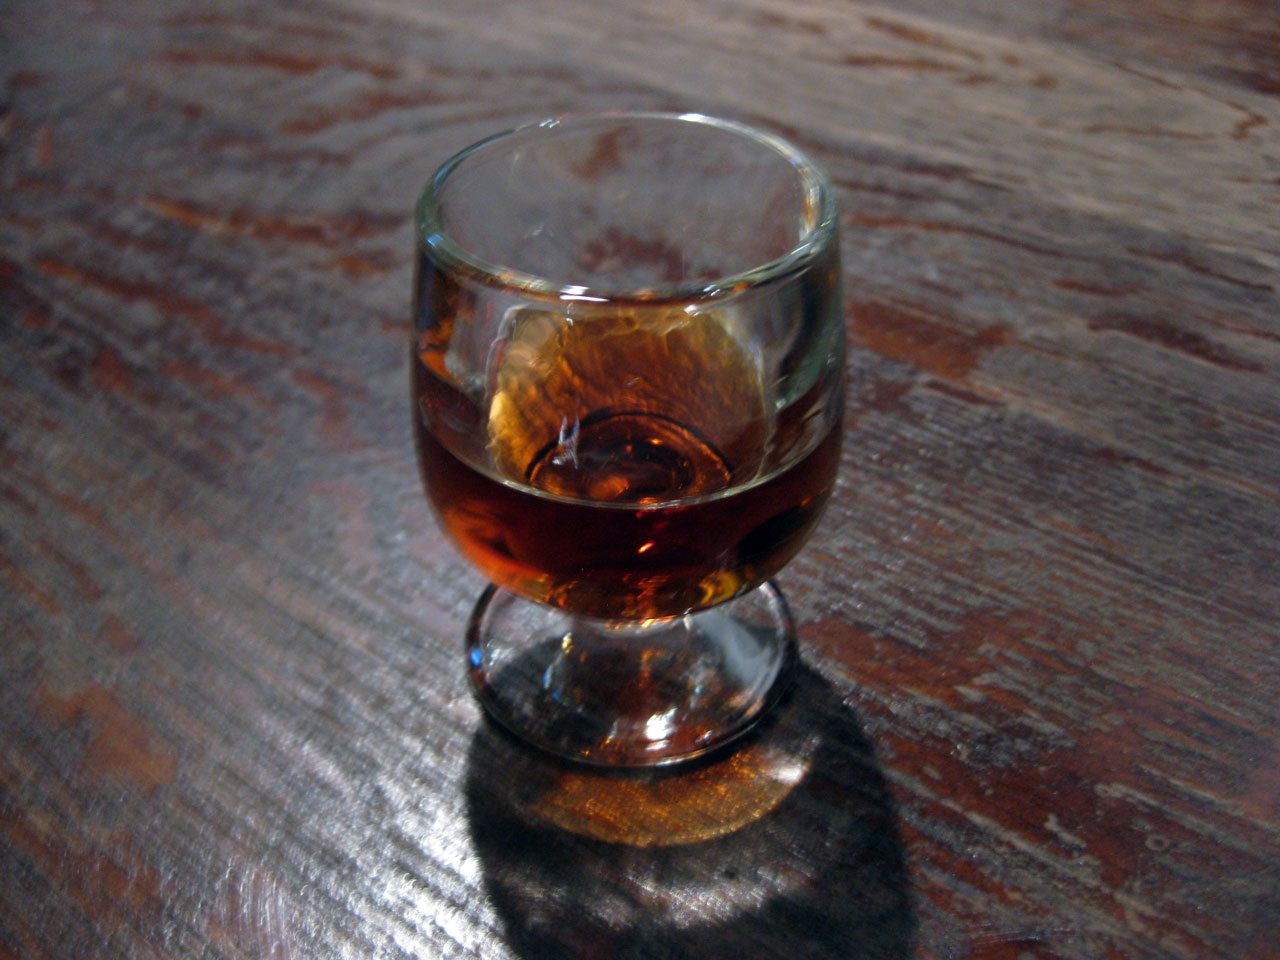 A glass of sweet Madeira wine